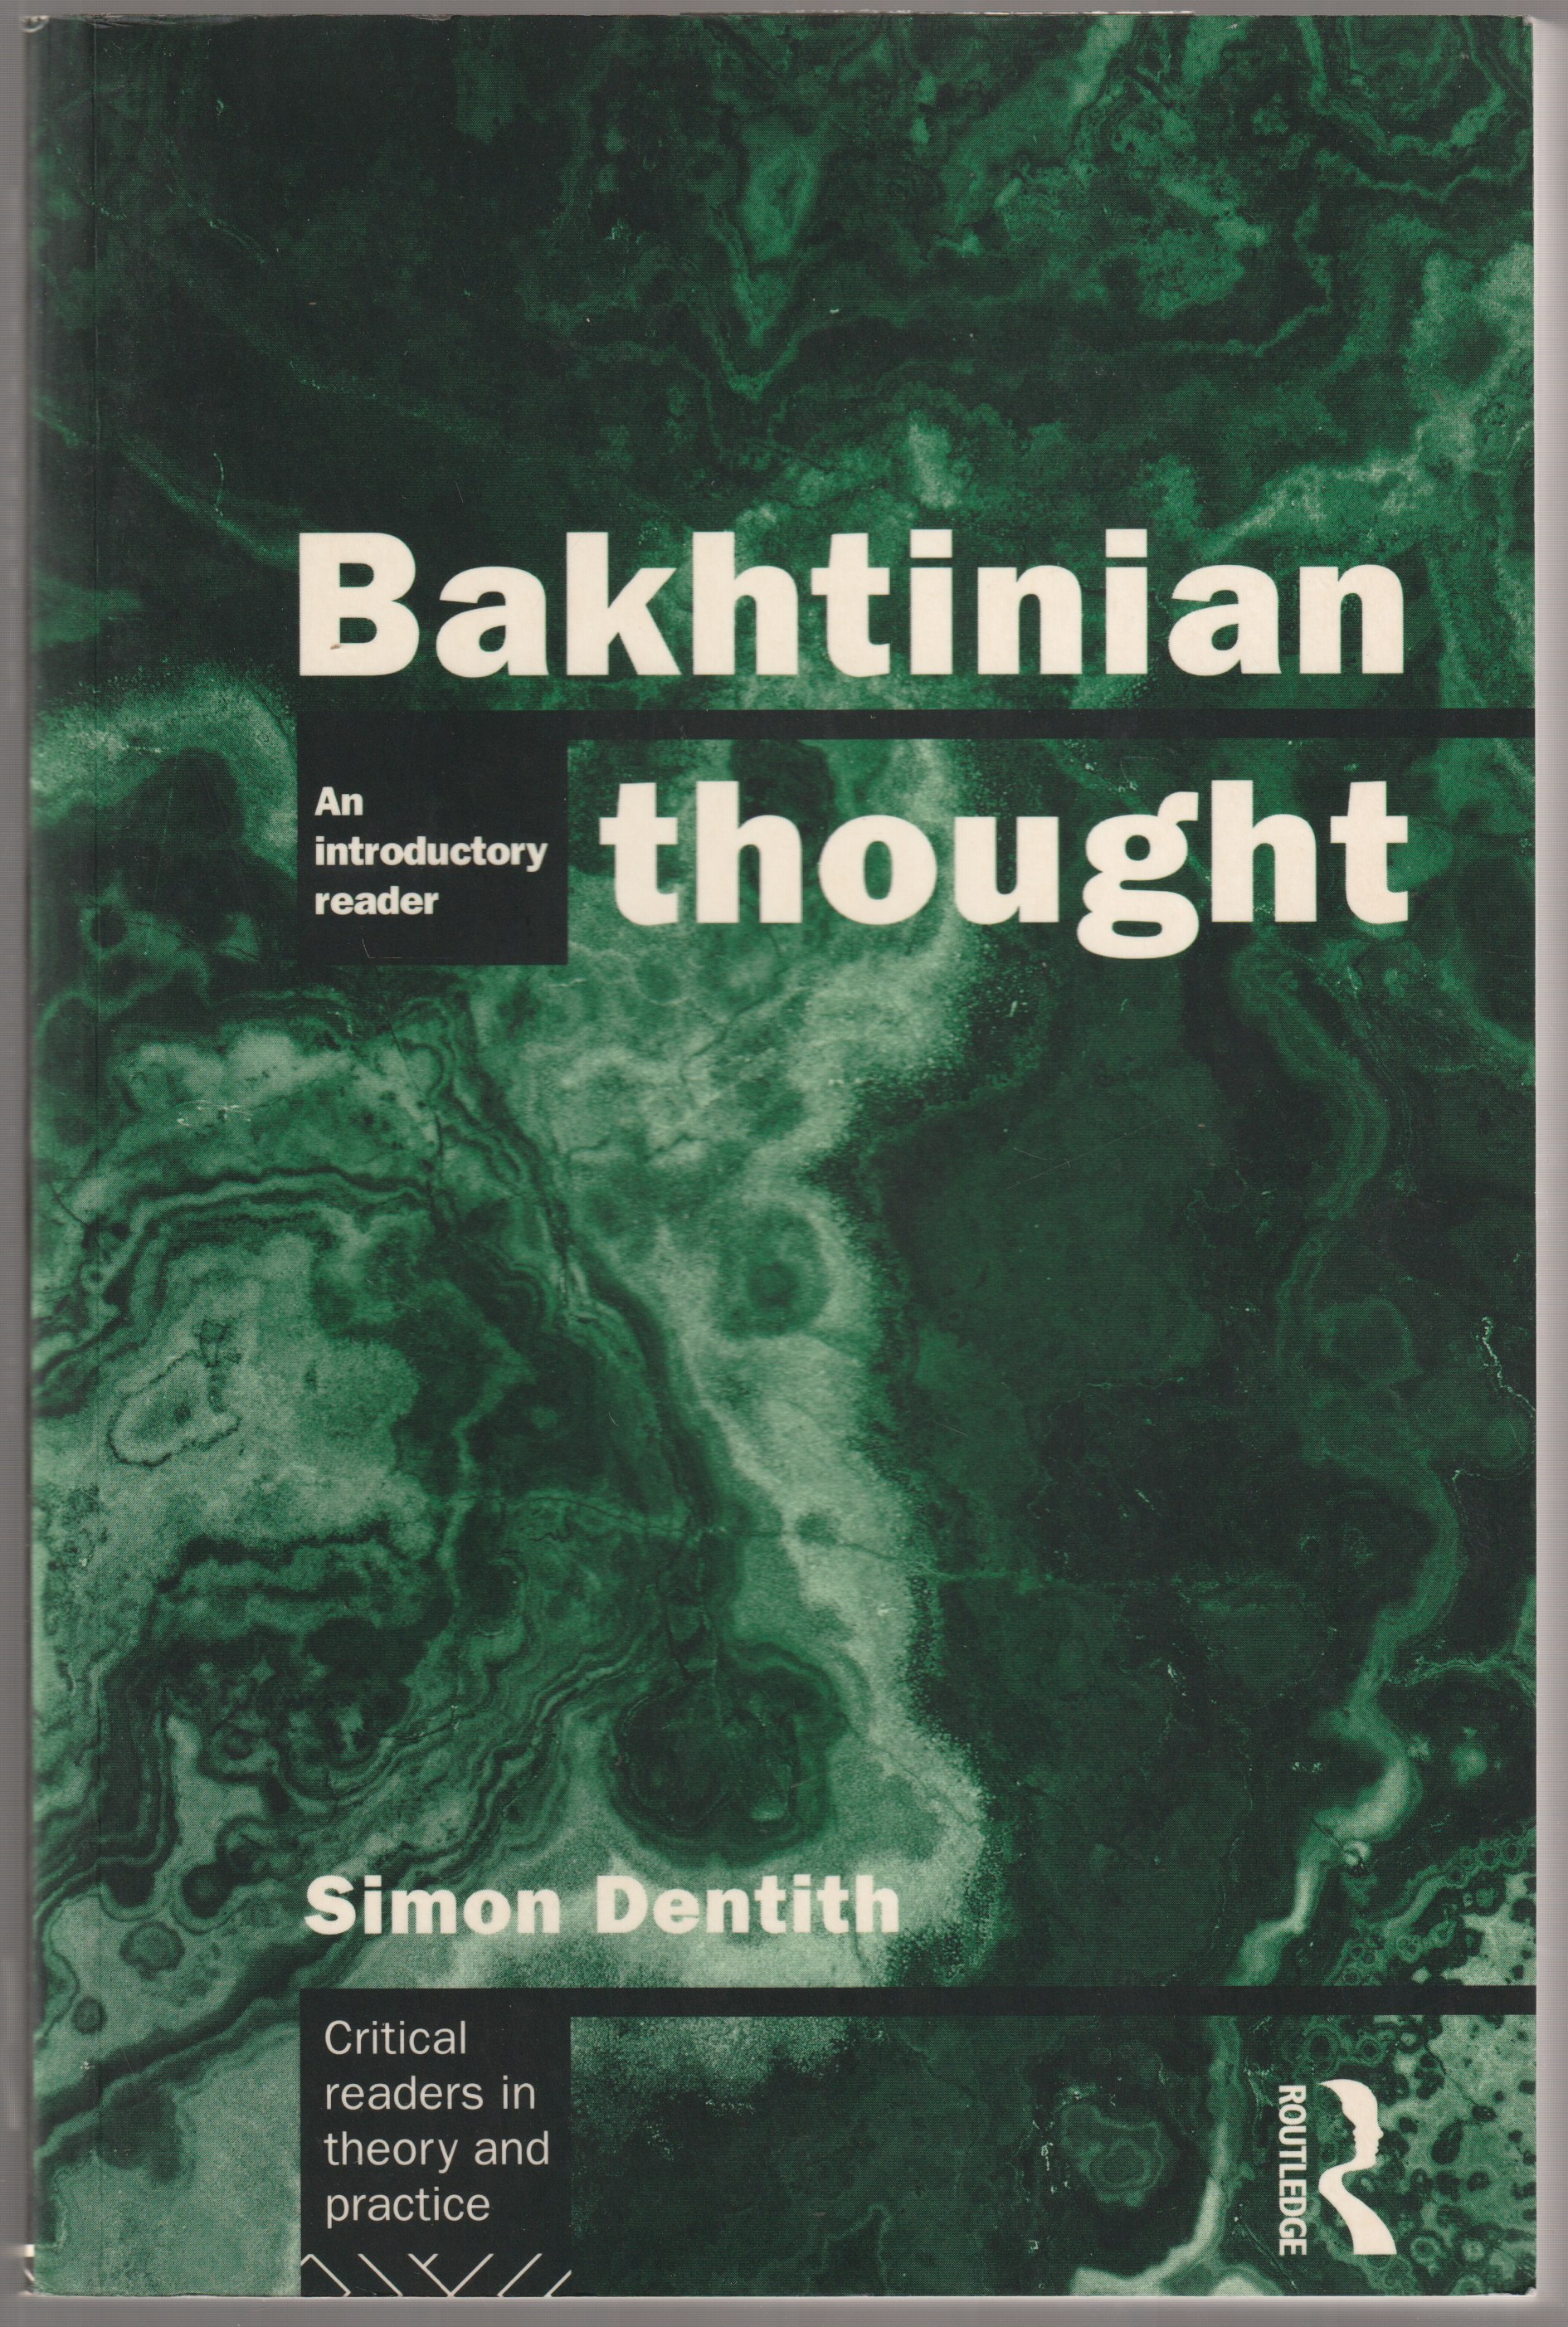 Bakhtinian thought : an introductory reader.